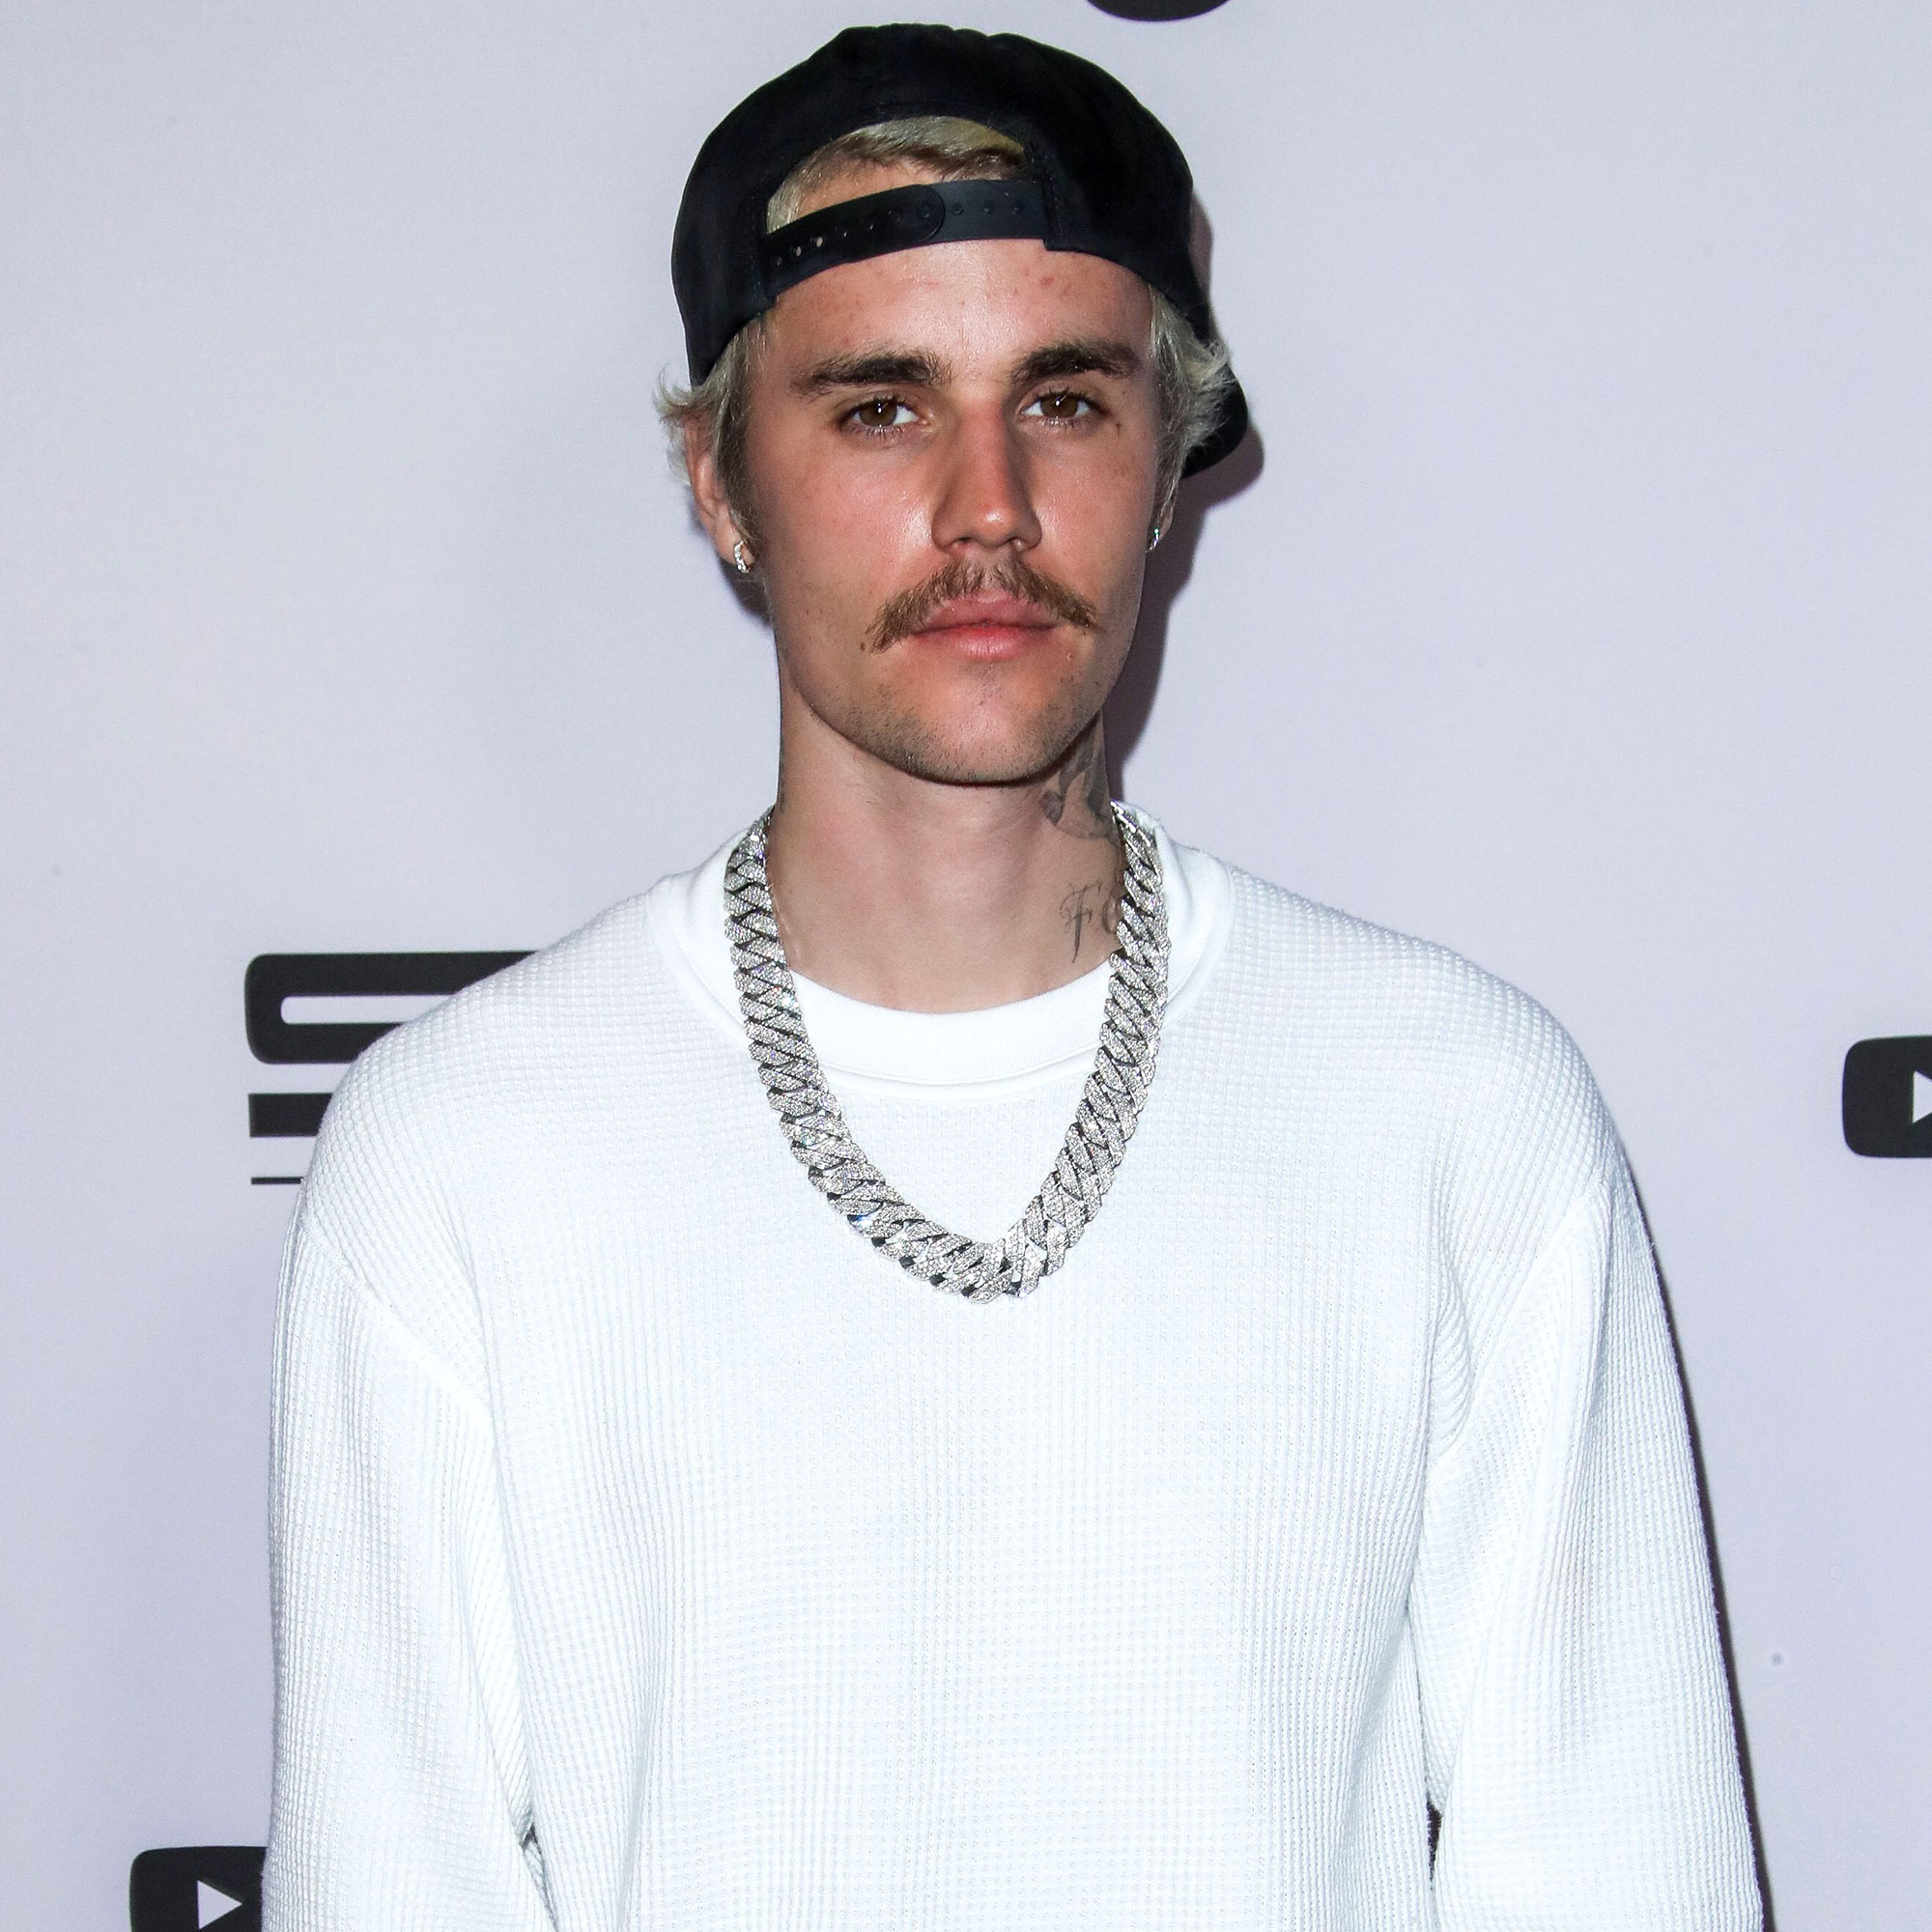 Bieber Approve' of H&M Selling His